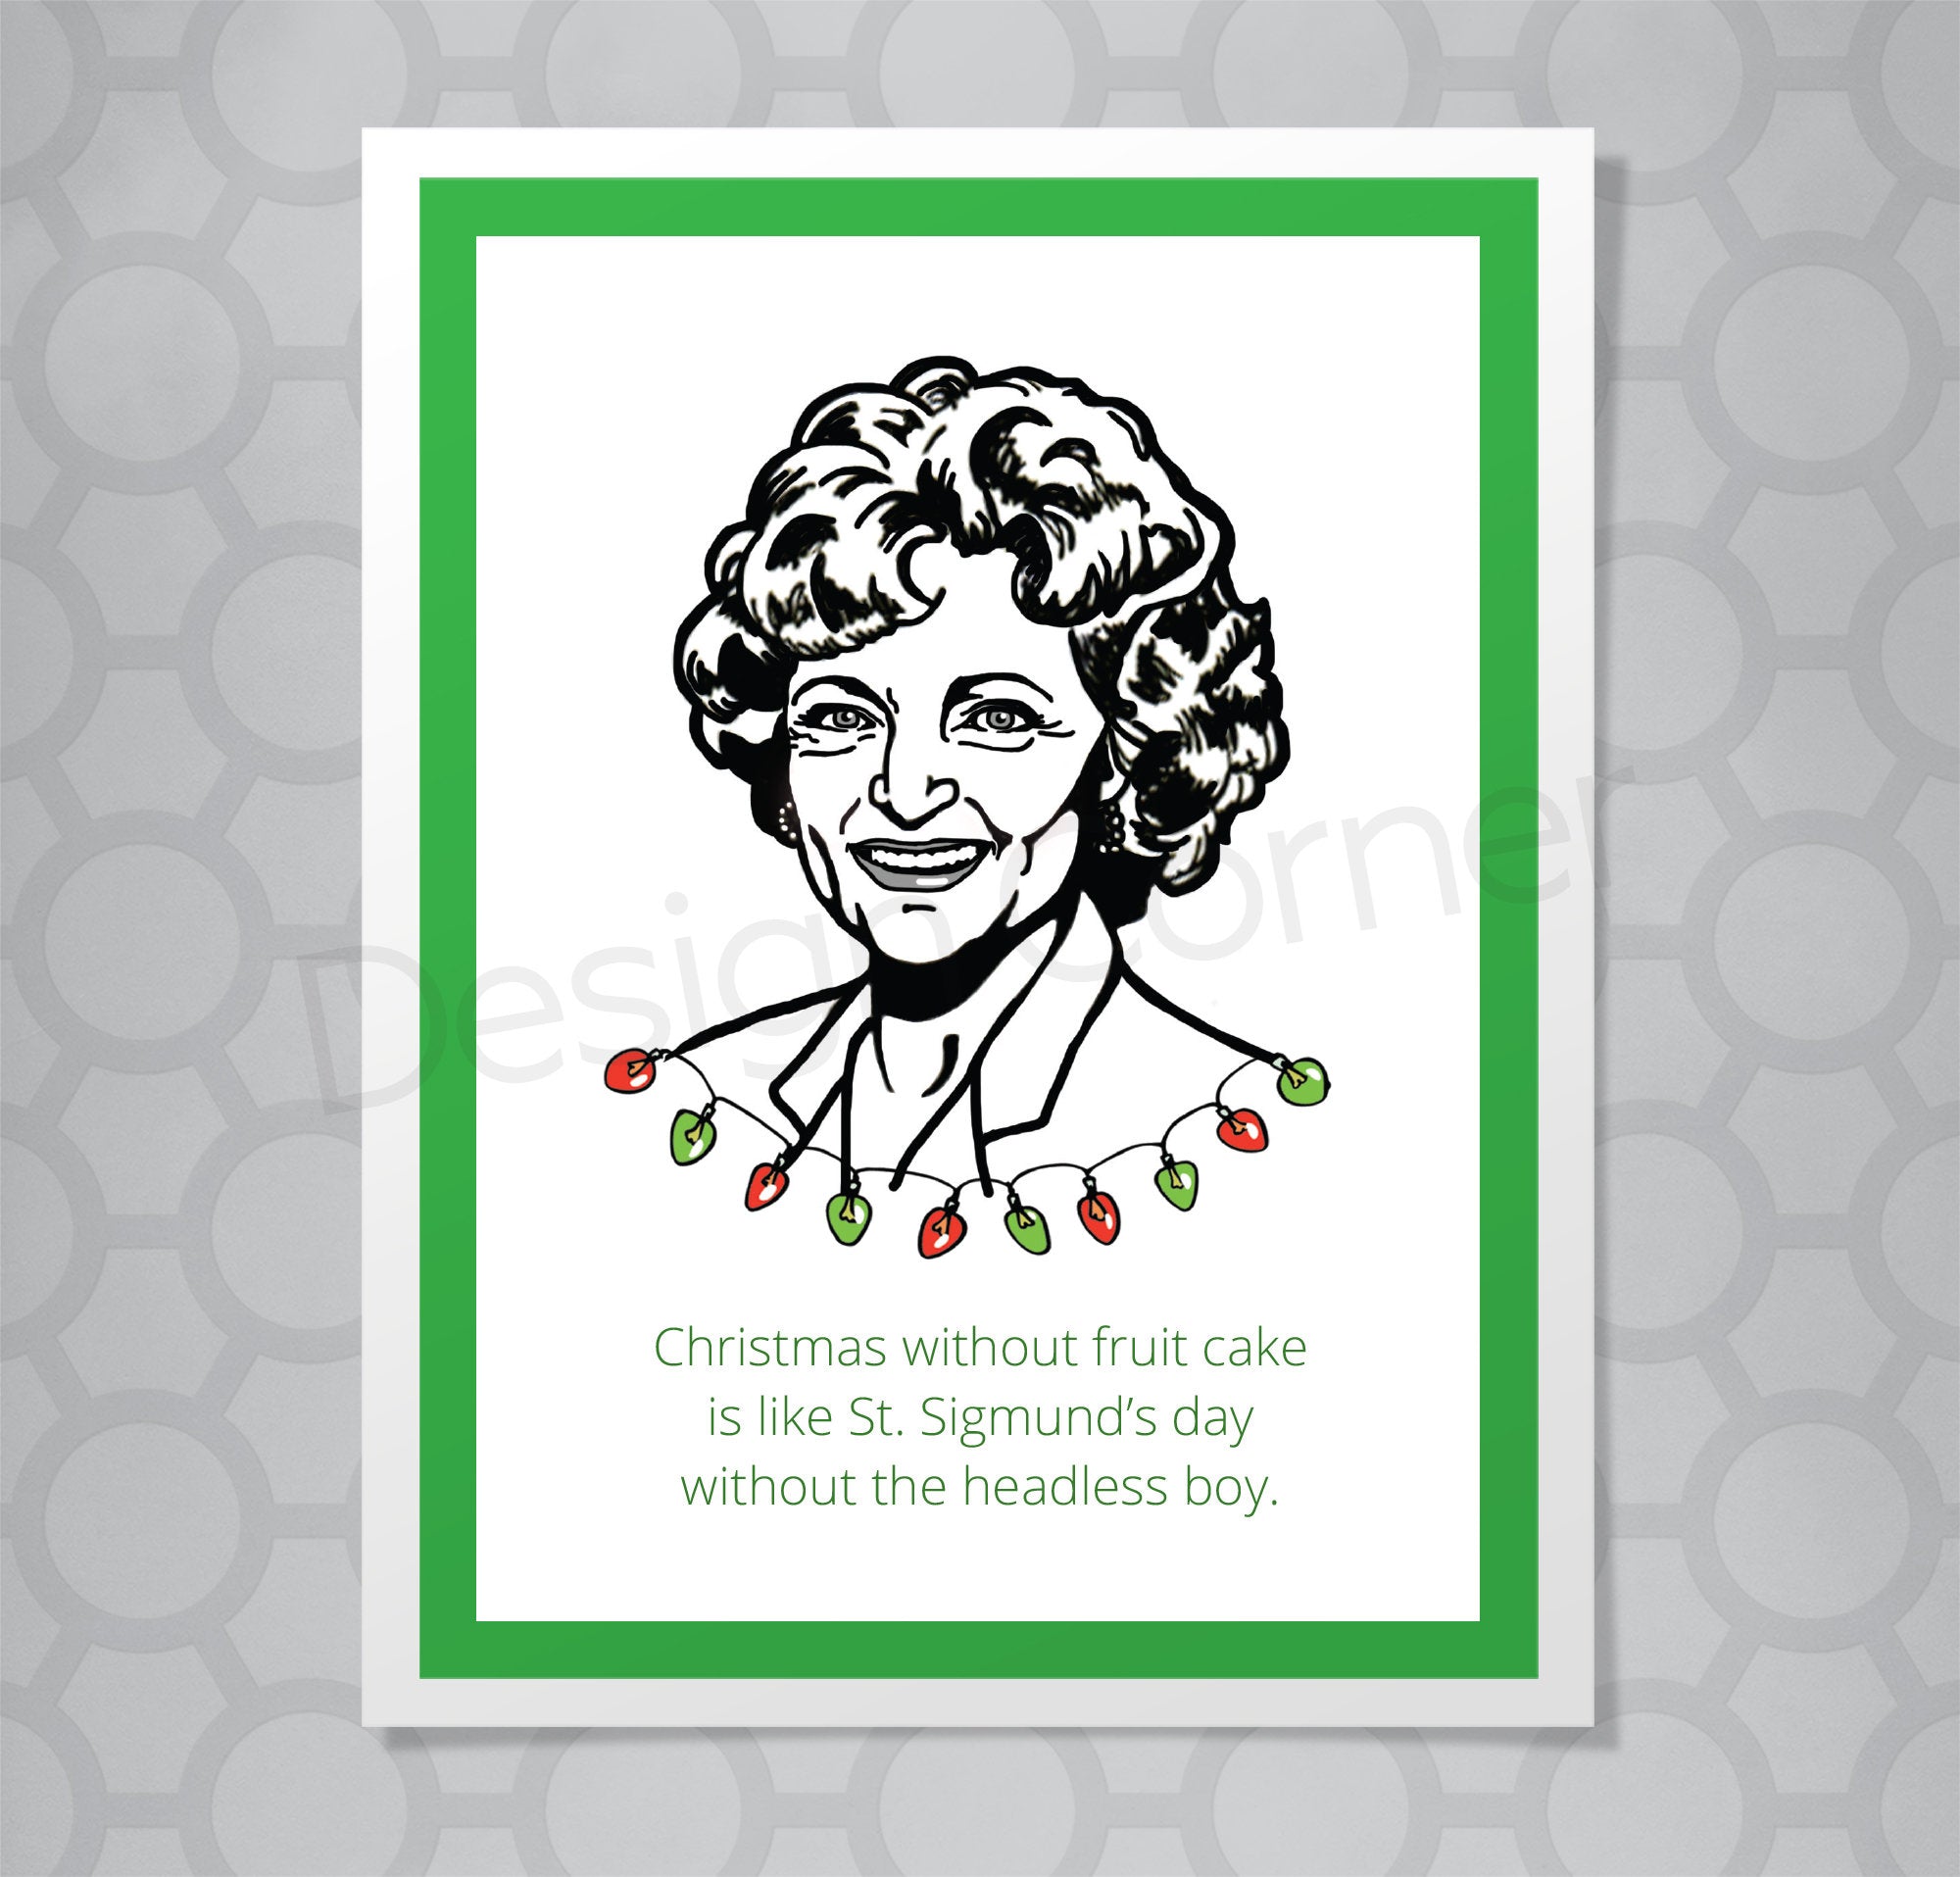 Illustration of Golden Girls Rose on front of Christmas card with caption "Christmas without fruit cake is like St. Sigmund's day without the headless boy"